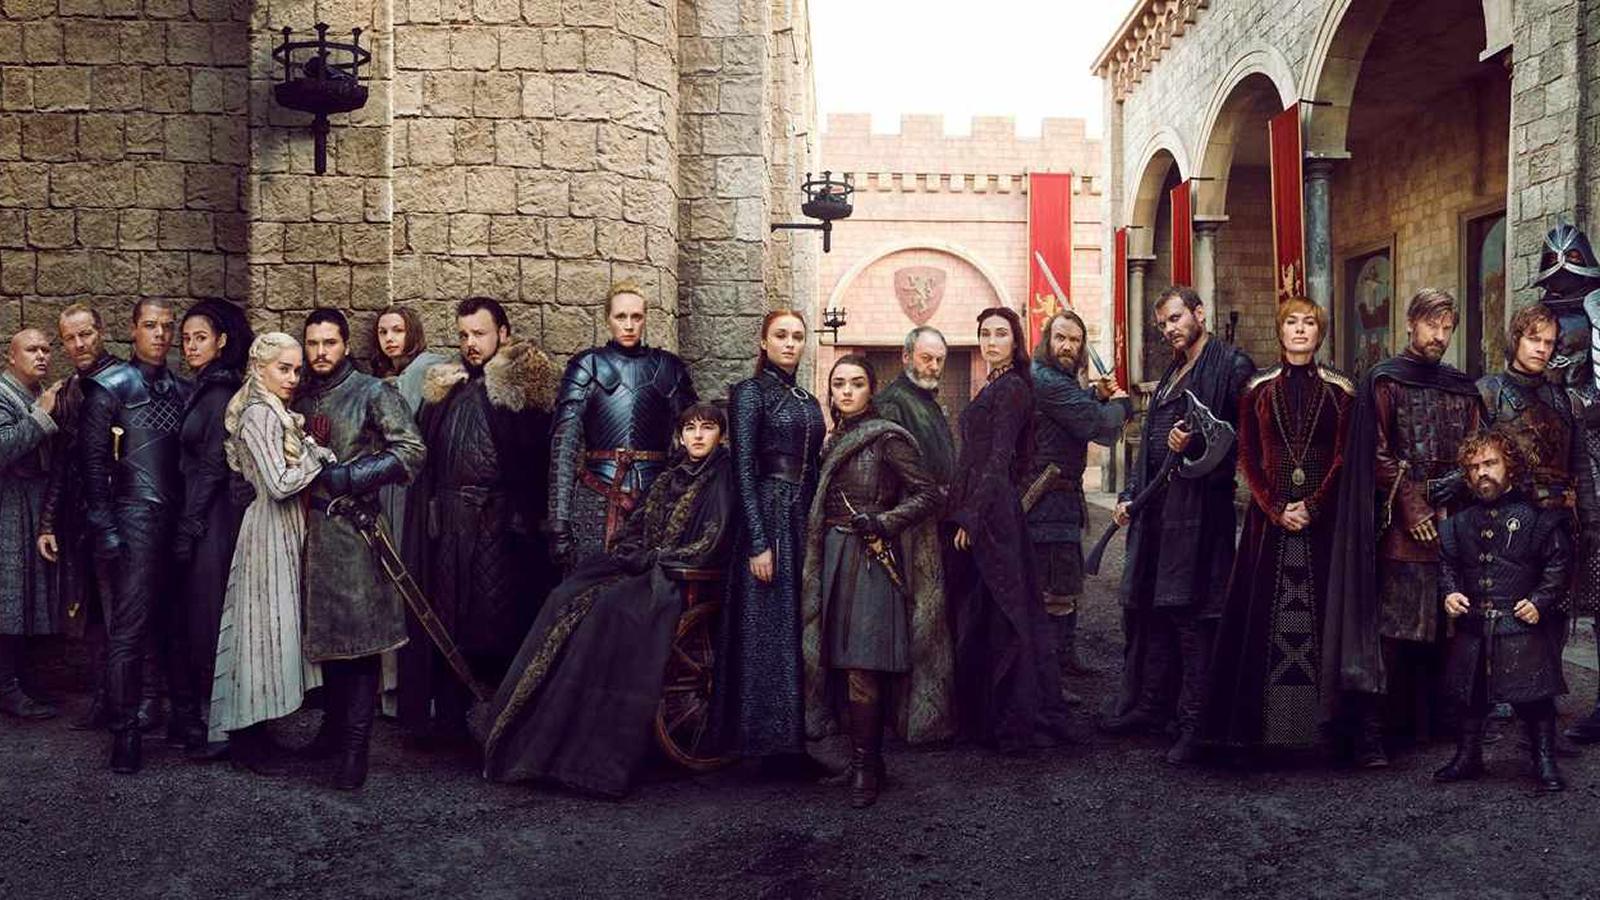 The core cast of Game of Thrones Season 8